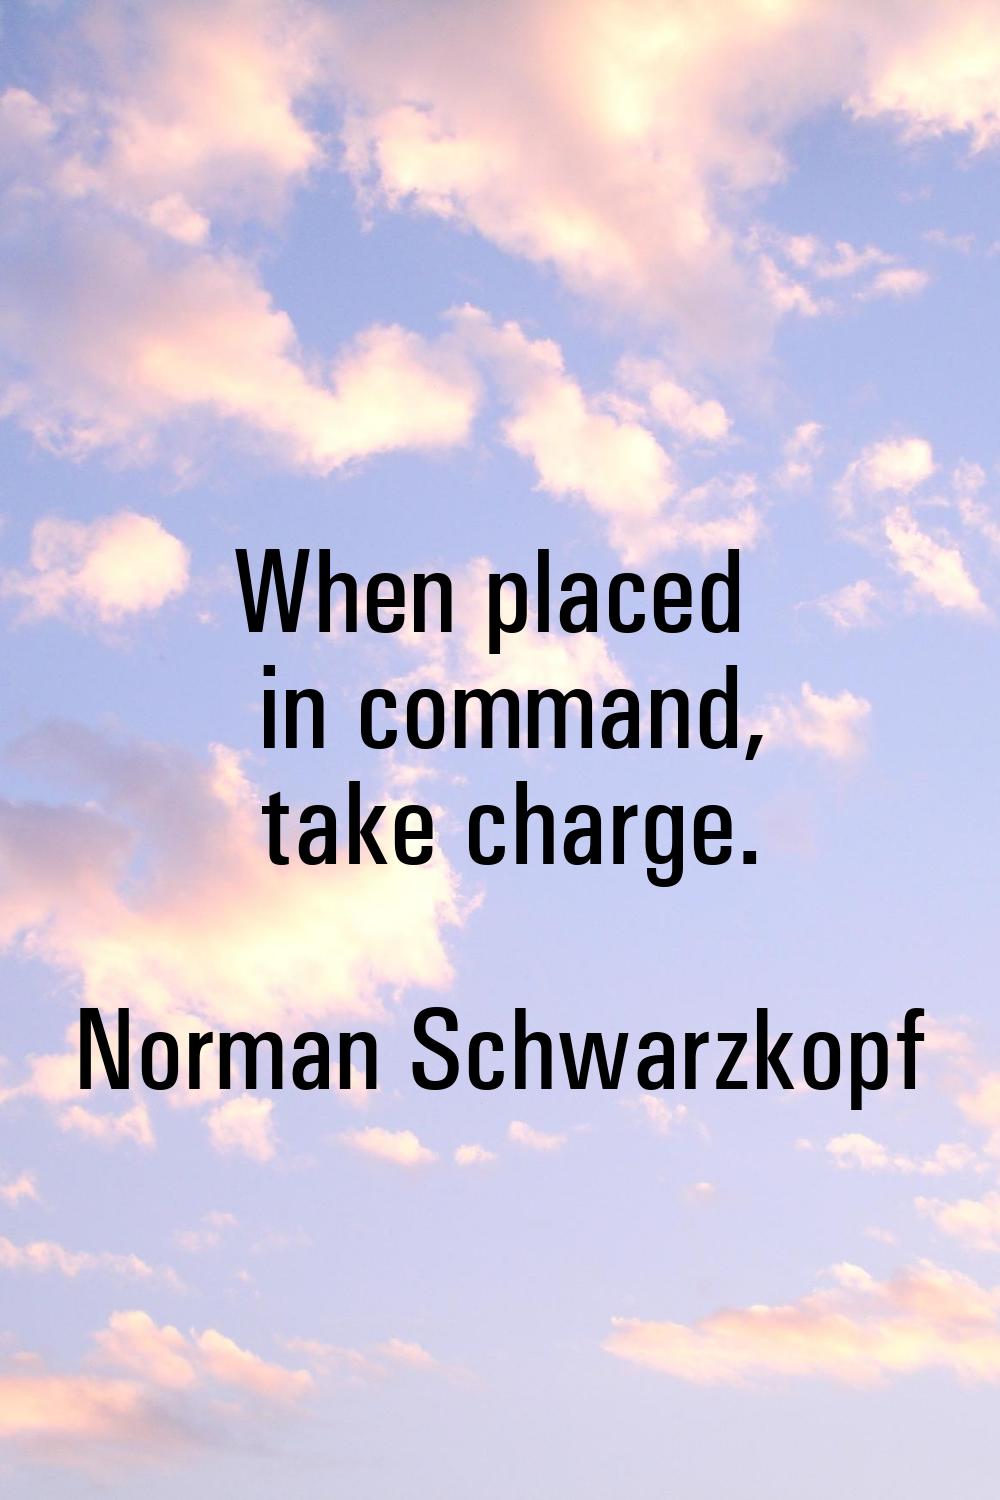 When placed in command, take charge.